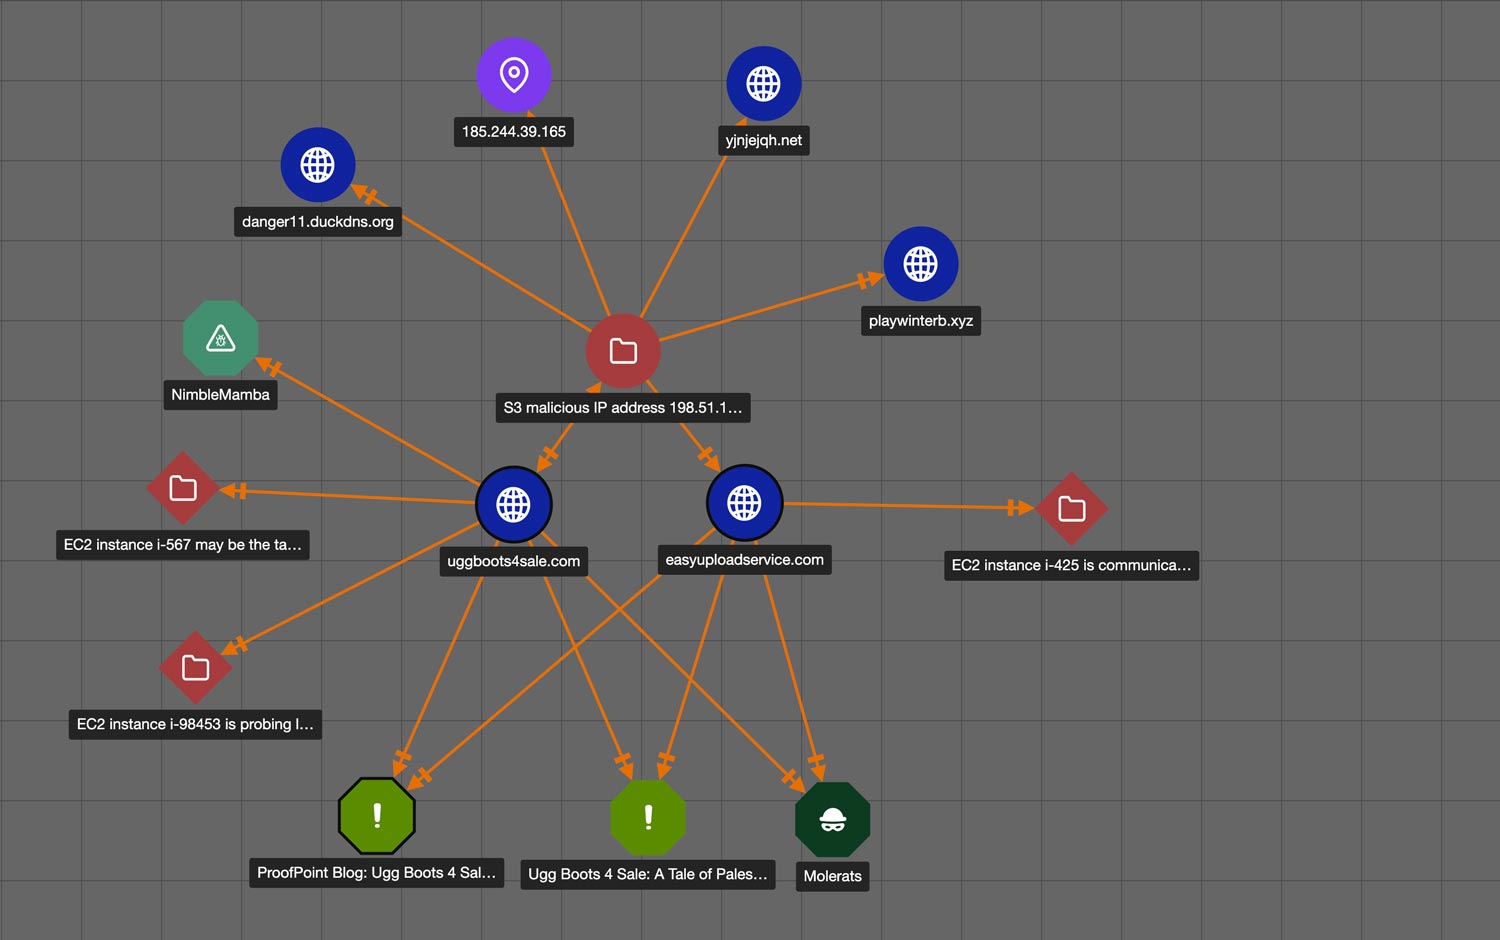 ThreatConnect graph showing threats and connections